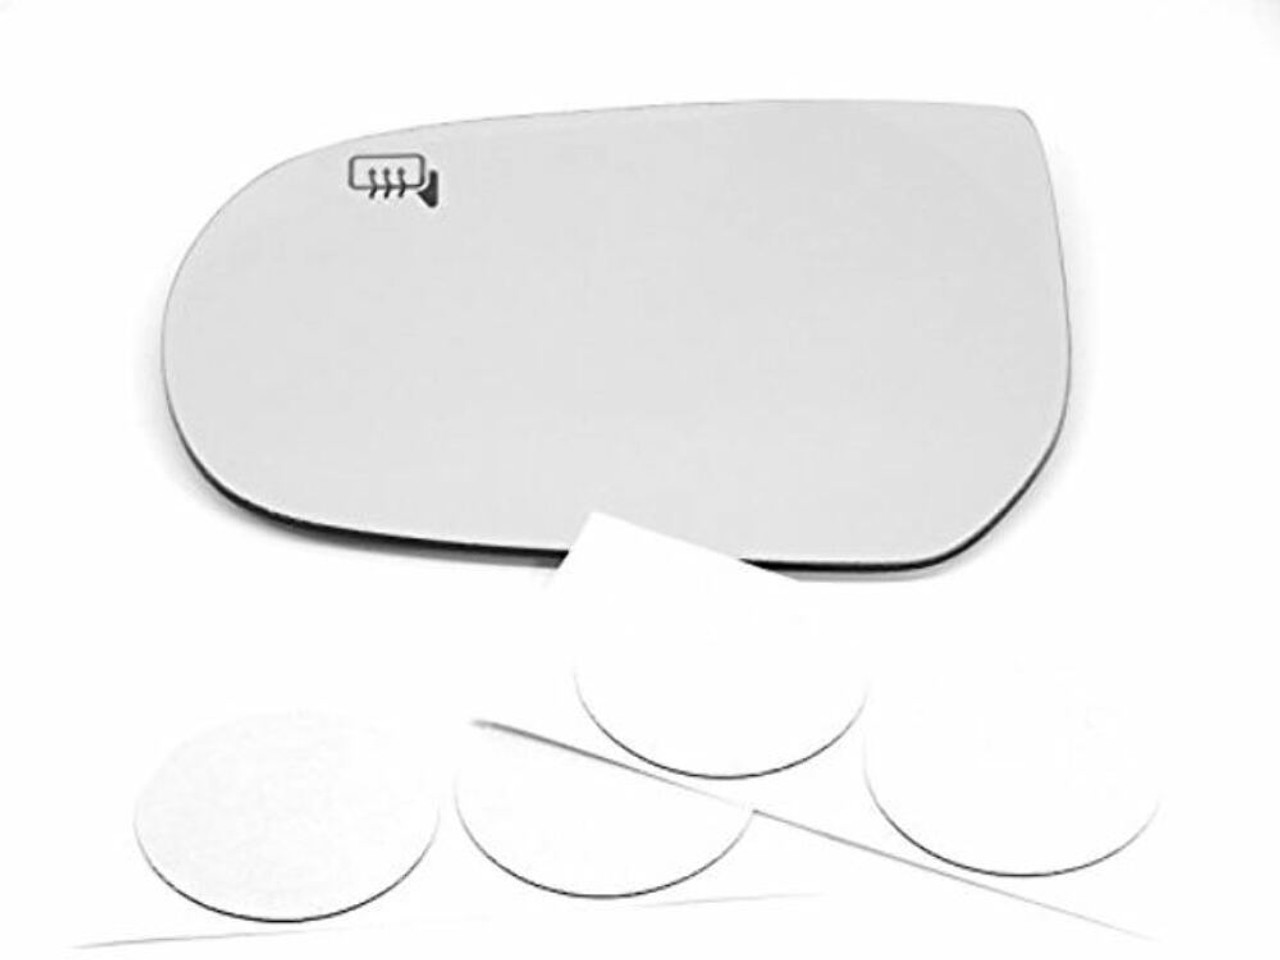 01-07 Escape, 05-07 Mariner, 01-07 Tribute Left Driver Heated Mirror Glass Lens w/Adhesive USA